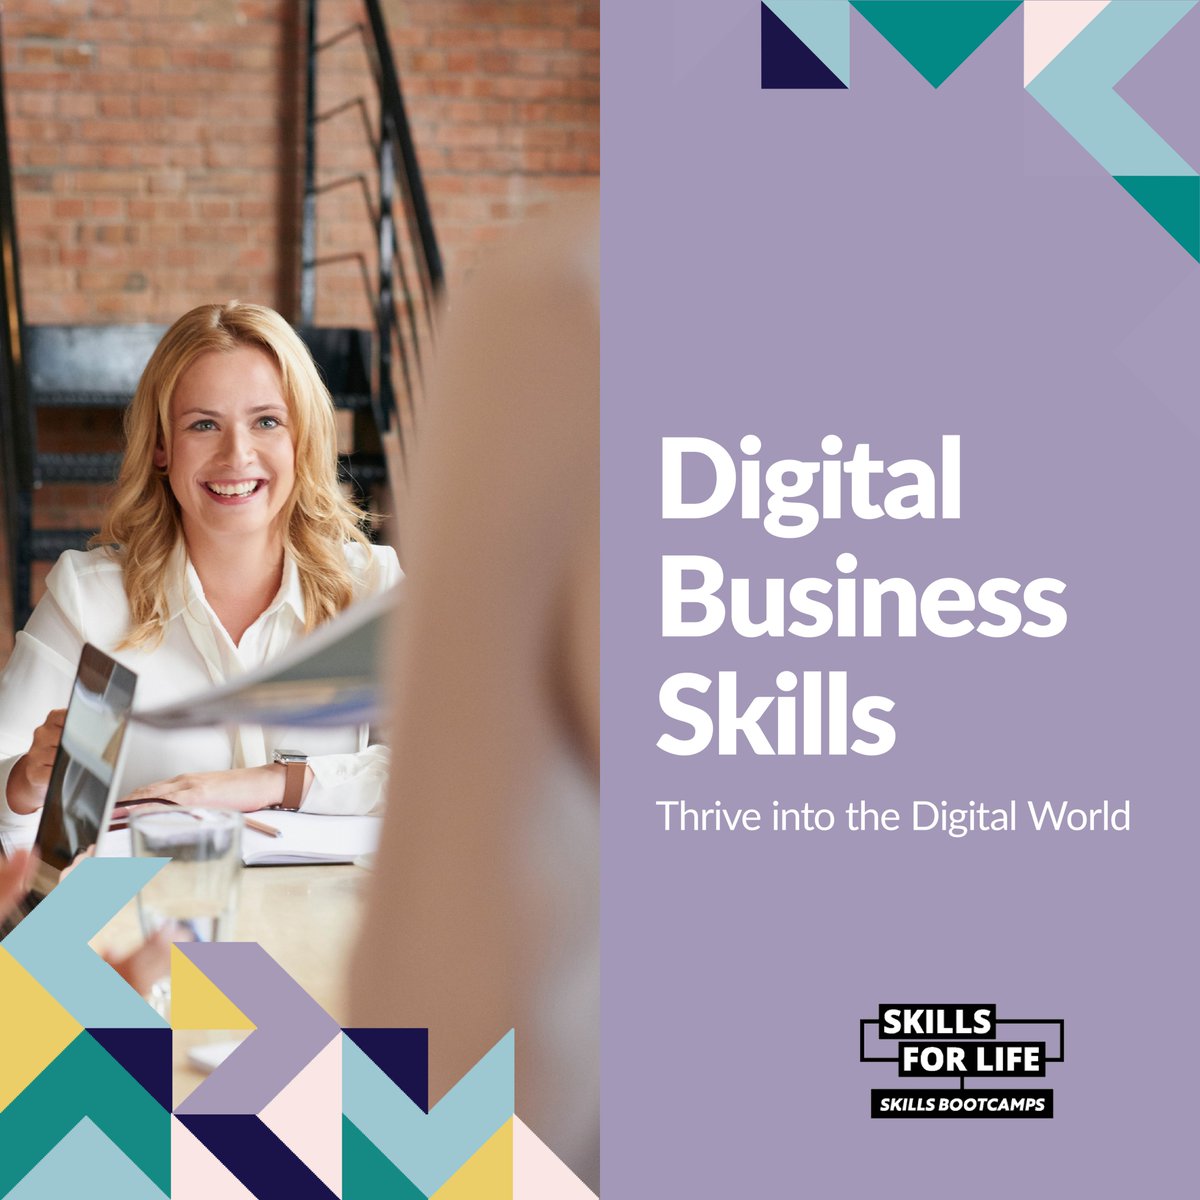 Ready to thrive in the digital era? Our Skills Bootcamp in Digital Business Skills kicks off on 20th February! Don't miss the opportunity to sharpen your skills. Enrol now: bit.ly/3OtrRrq #skillsbootcamp #learning #education #businesstips